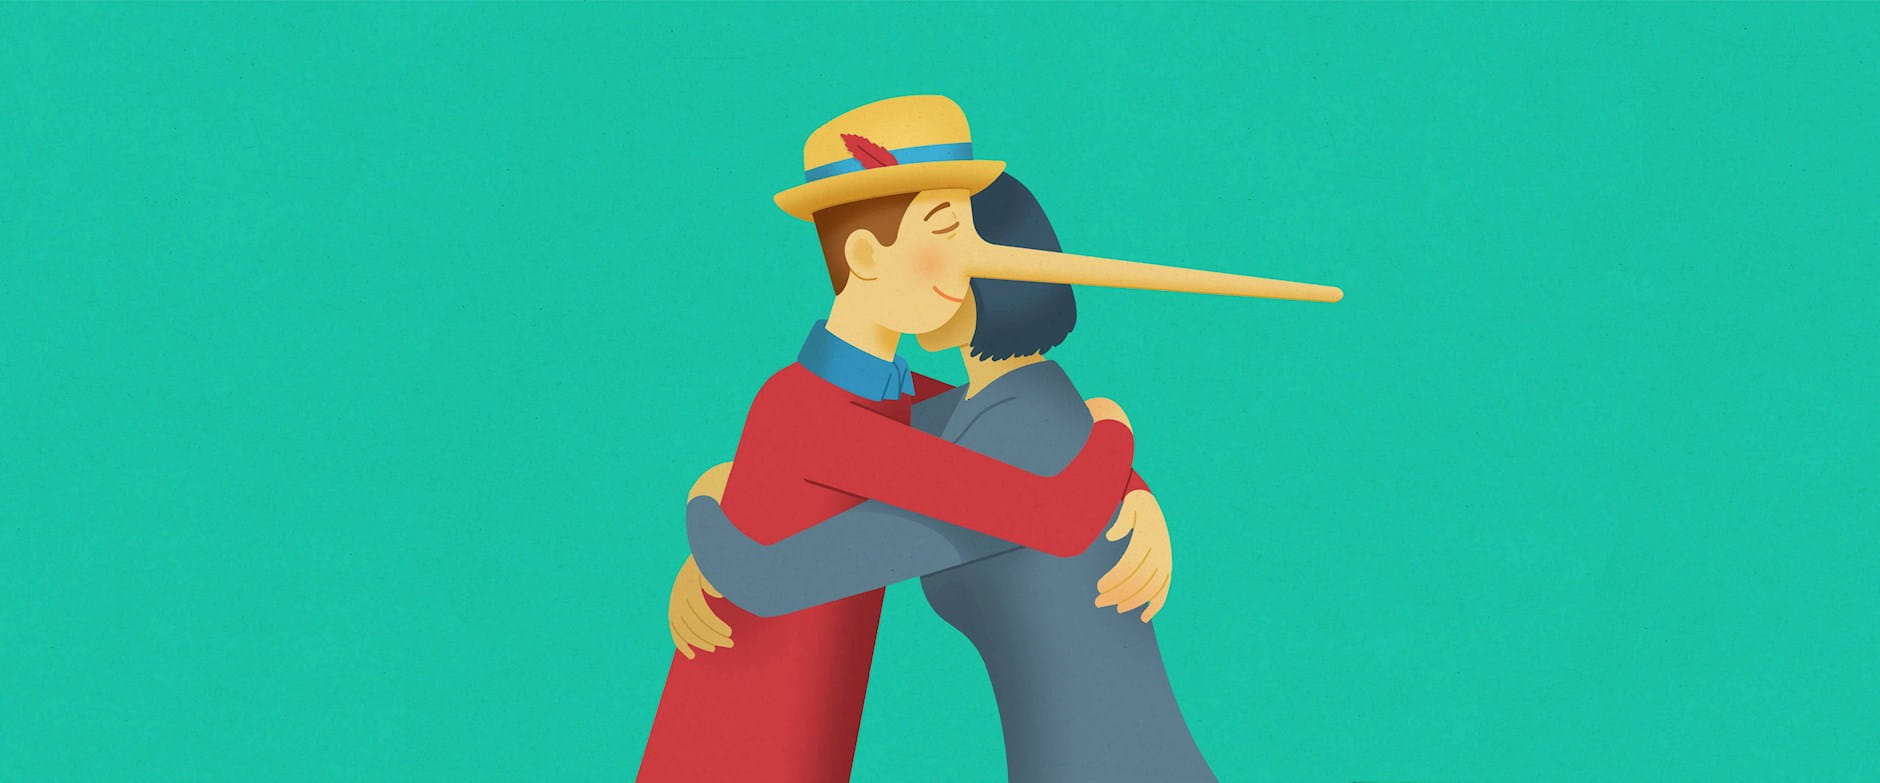 Illustration of two people hugging, one with a long nose